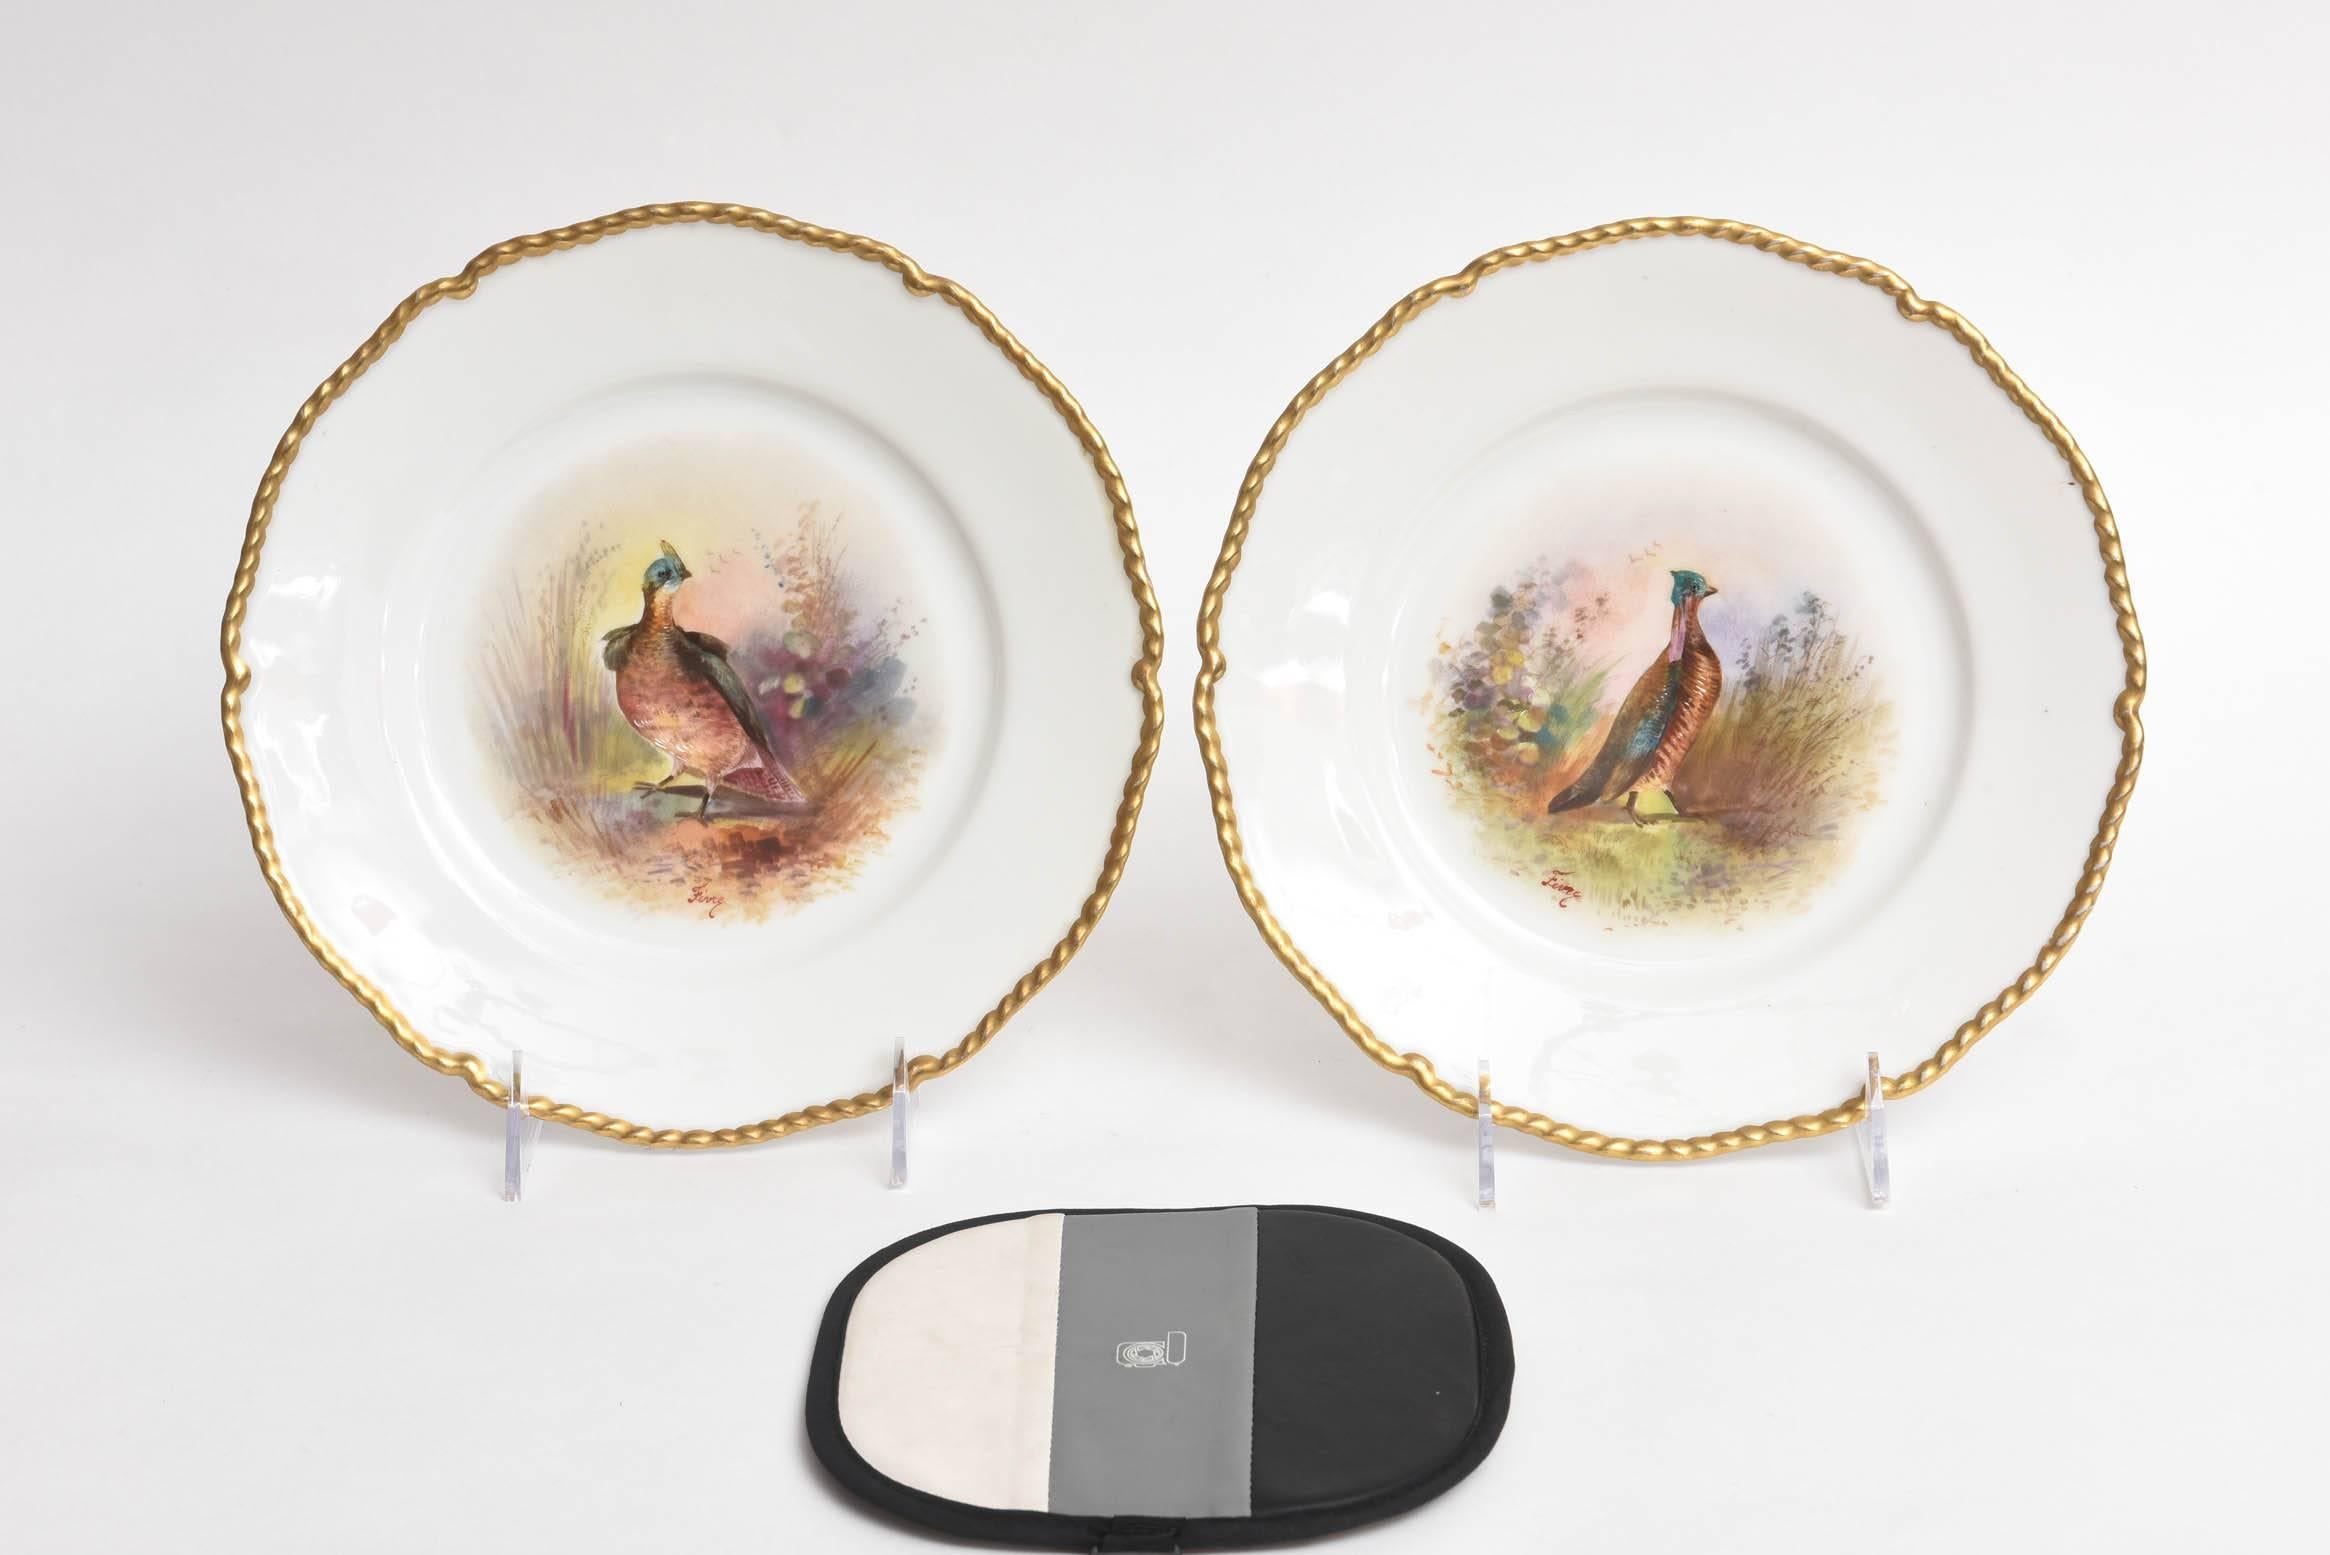 A delightful and well painted pair of game bird plates. This pair features a scalloped and gold trim shape and rim. Two very colorful and hand-painted birds amidst full flora and fauna.